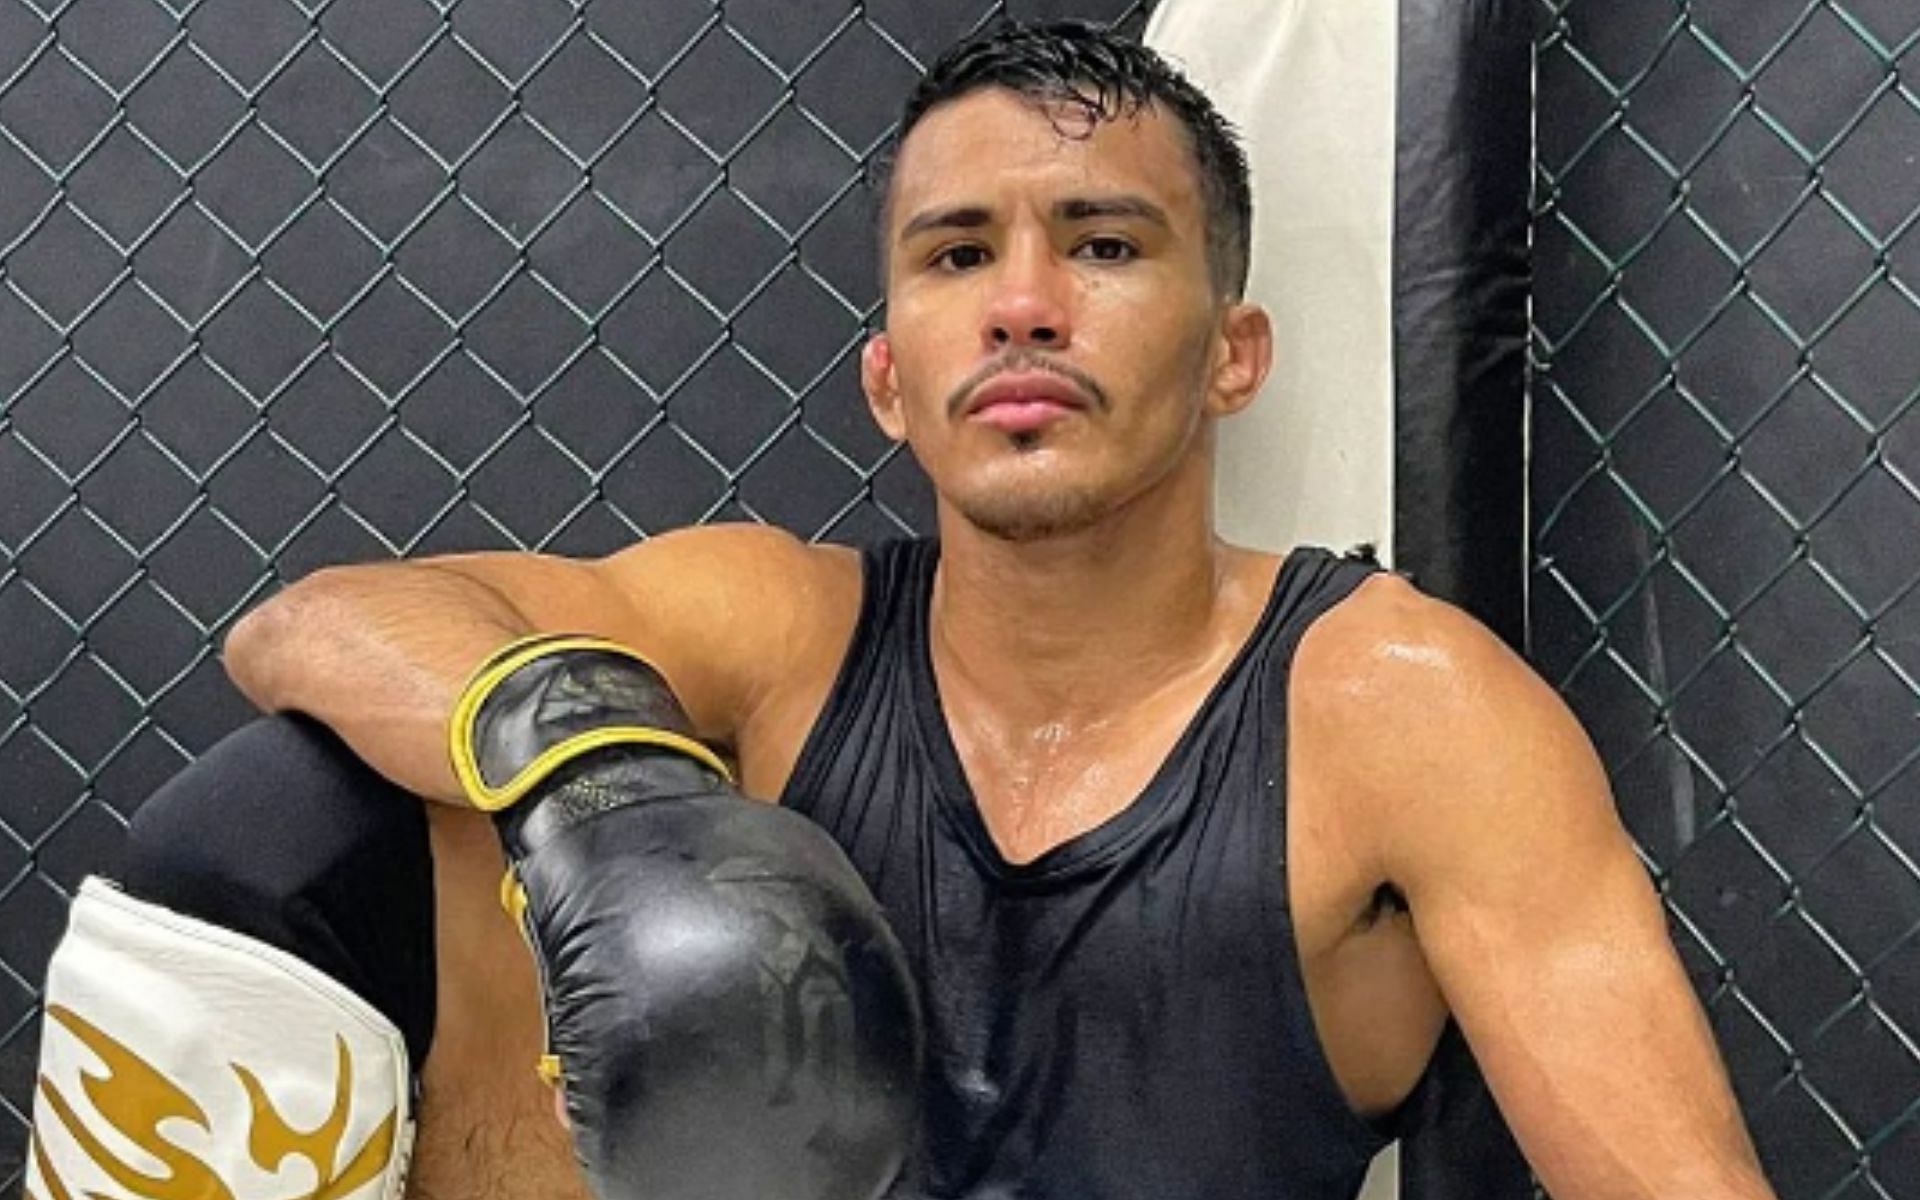 Igor Severino&rsquo;s bite backlash: Nevada State Athletic Commission withholds fight purse after illegal act at UFC Vegas 89 [Image courtesy: @igorseverino_ufc - Instagram]